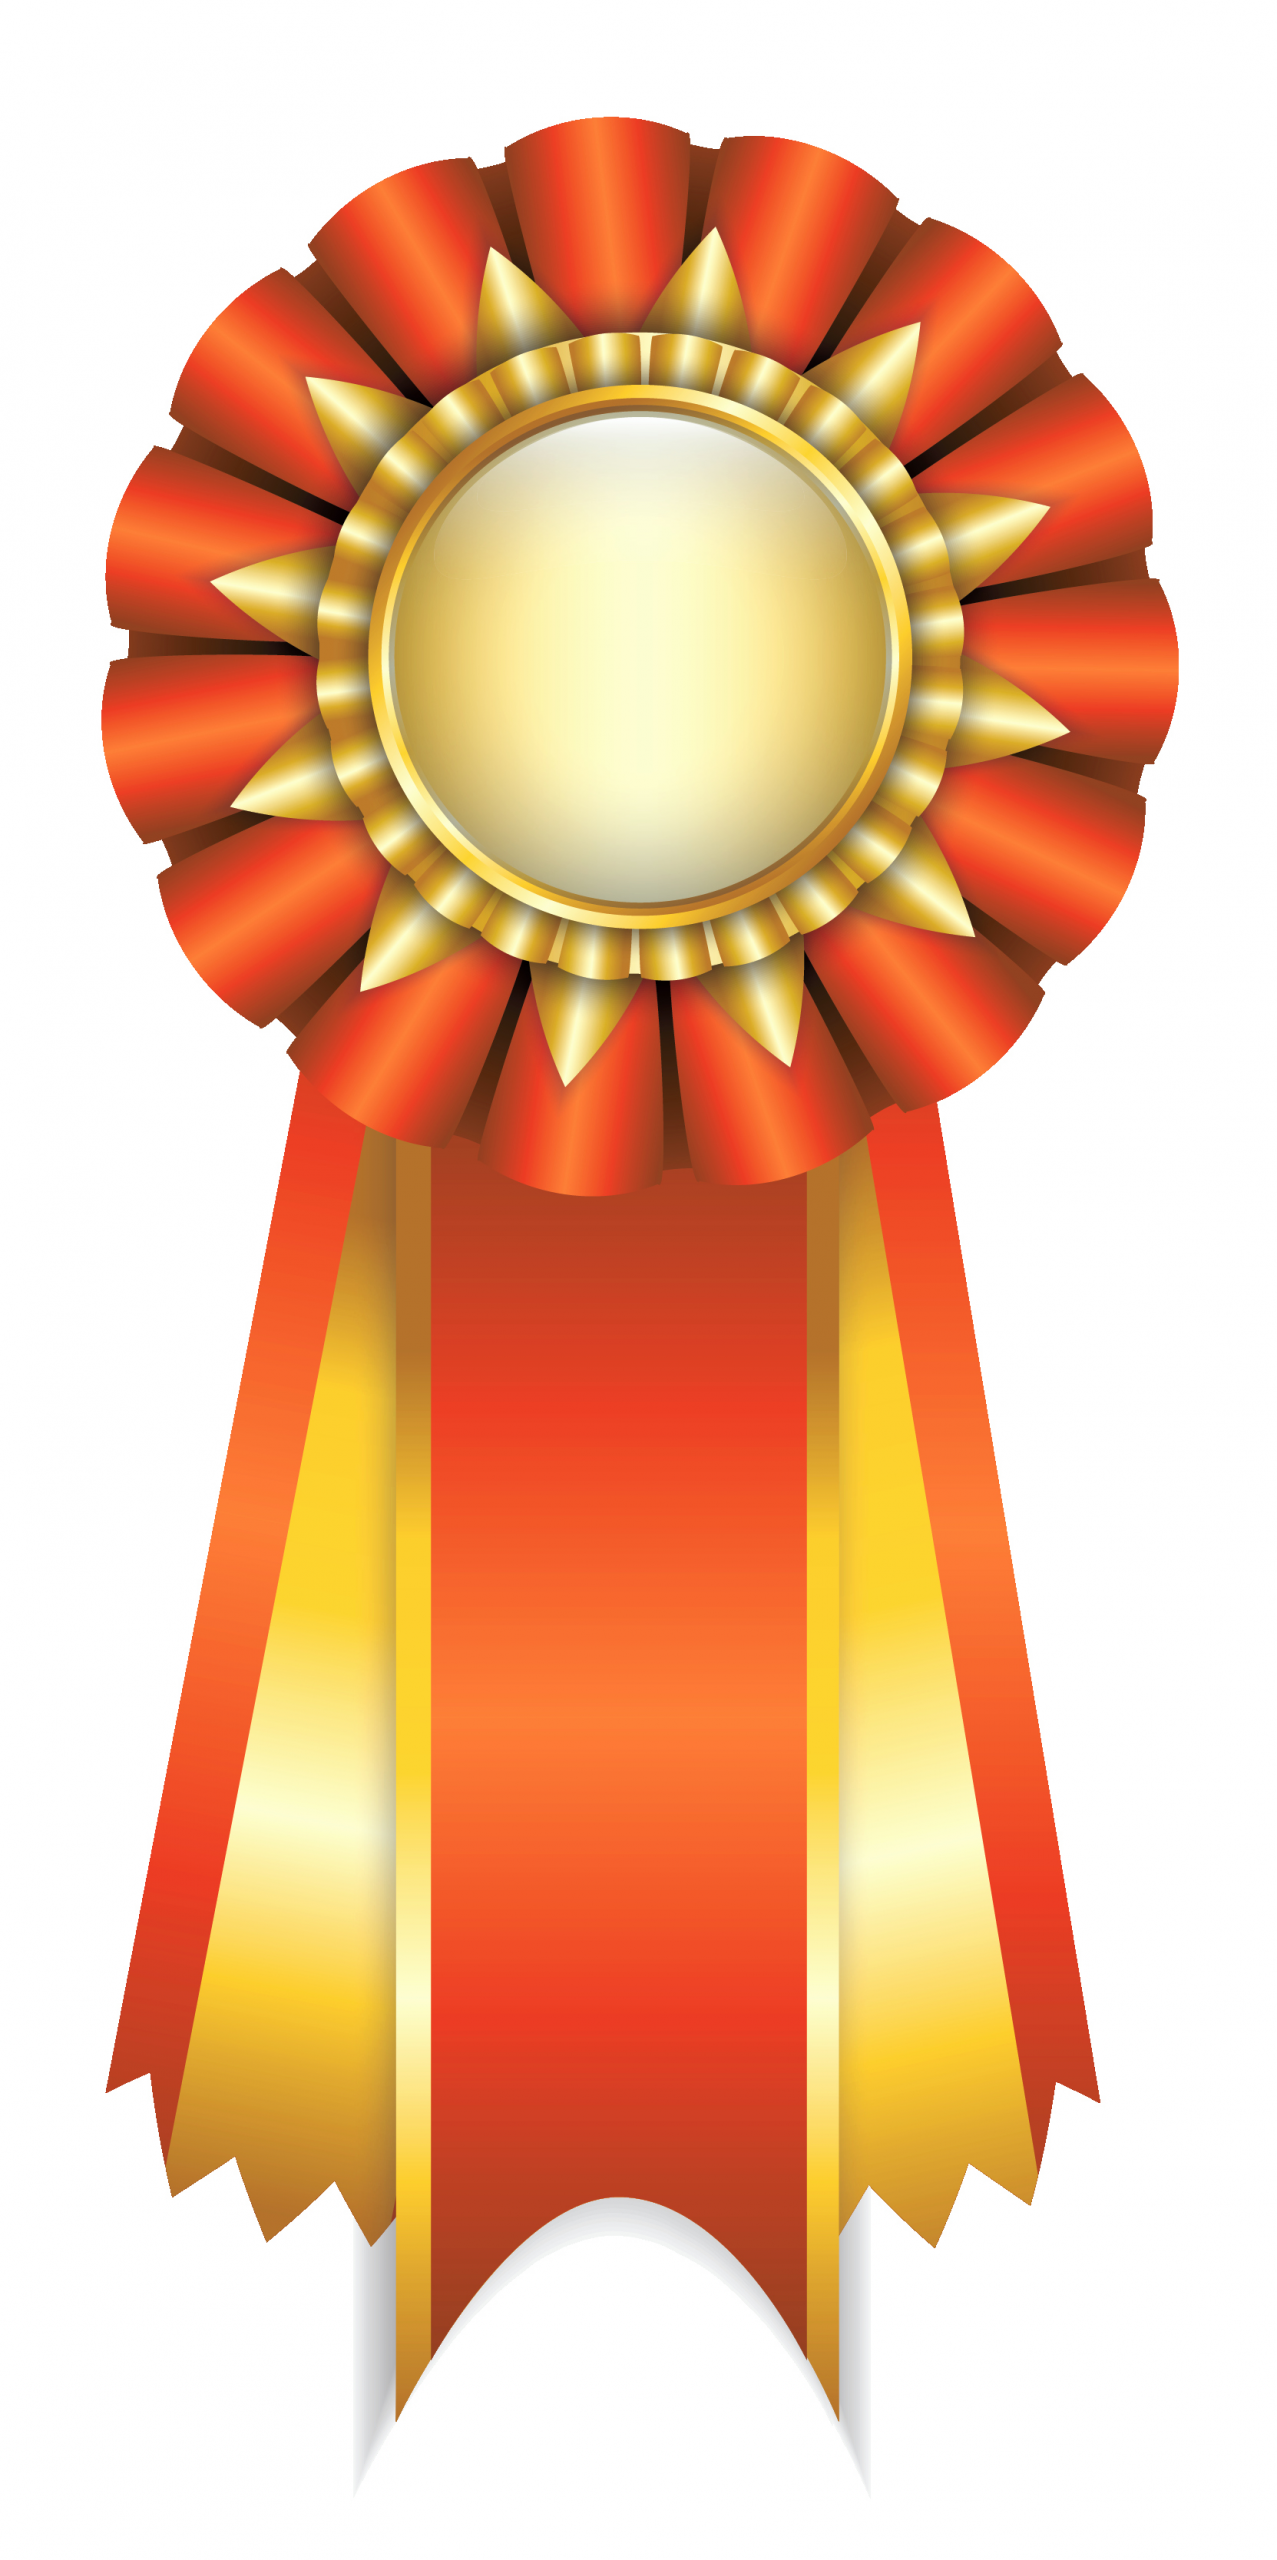 Picture Of Award Ribbon Luxury Free Ribbon Download Free Clip Art Free Clip Art On